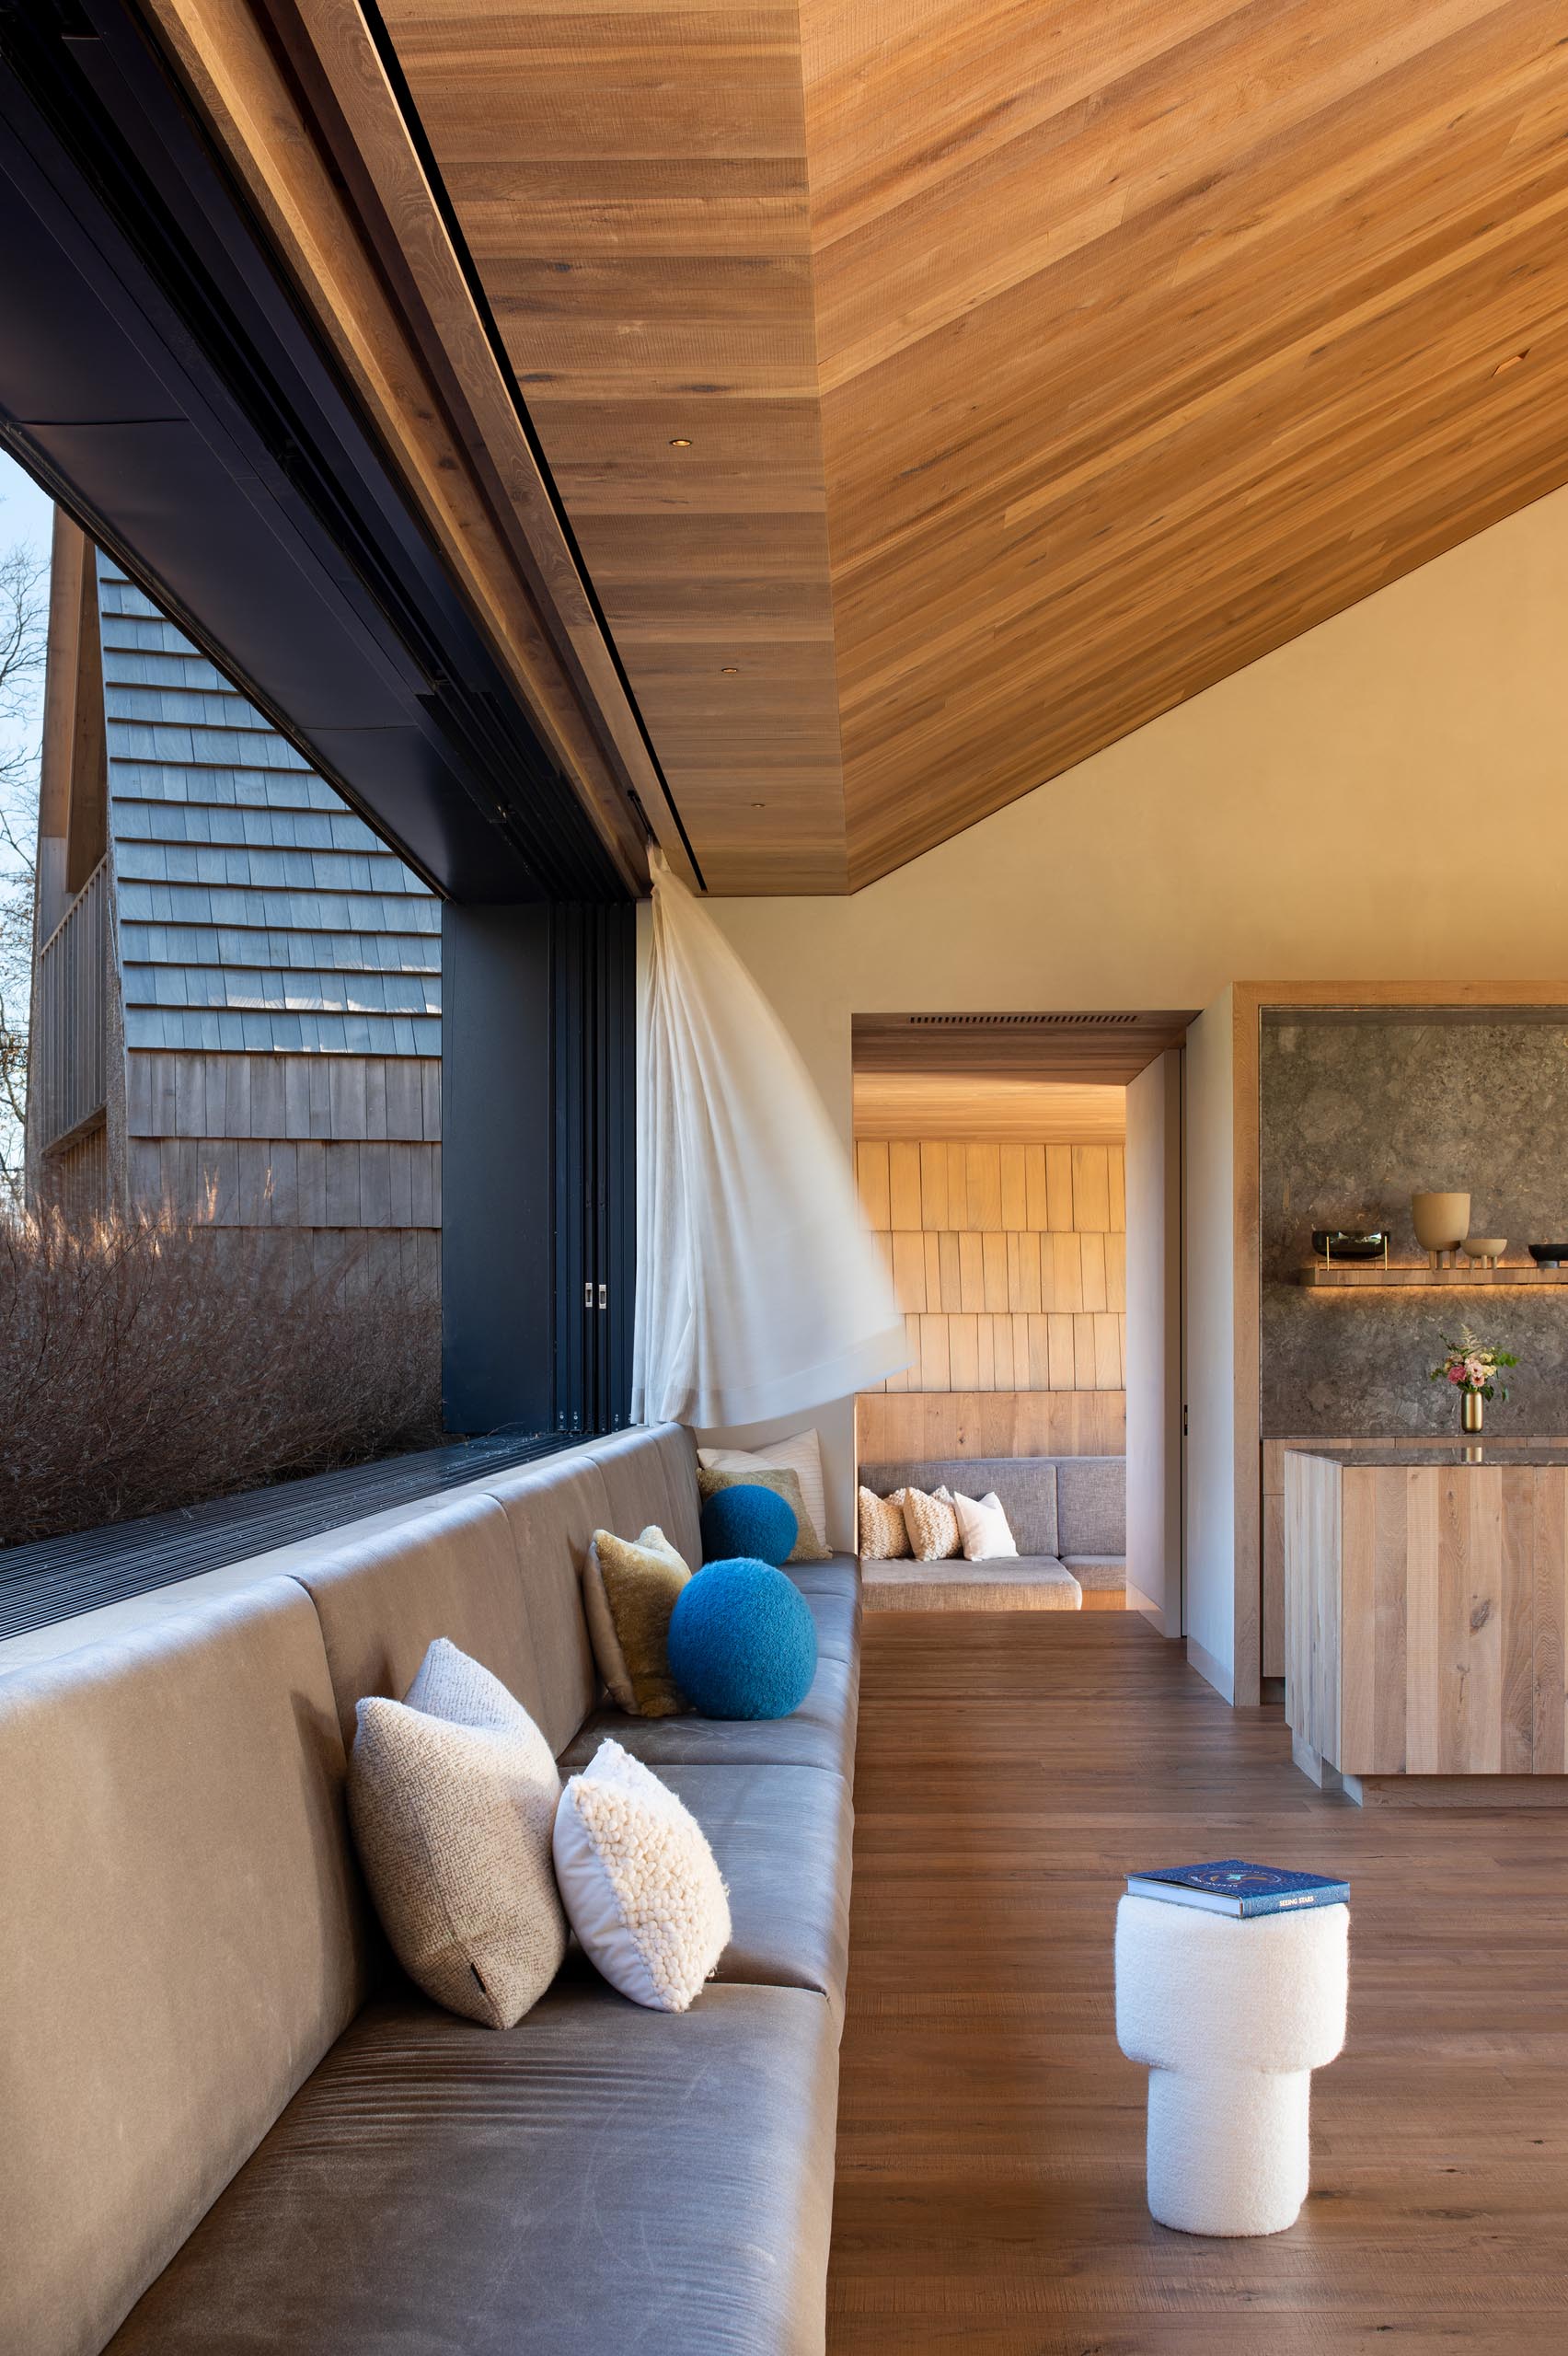 Black window frames contrast the oak interior, while a long built-in bench adds ample seating to the open plan room that connects to the outdoor living room.